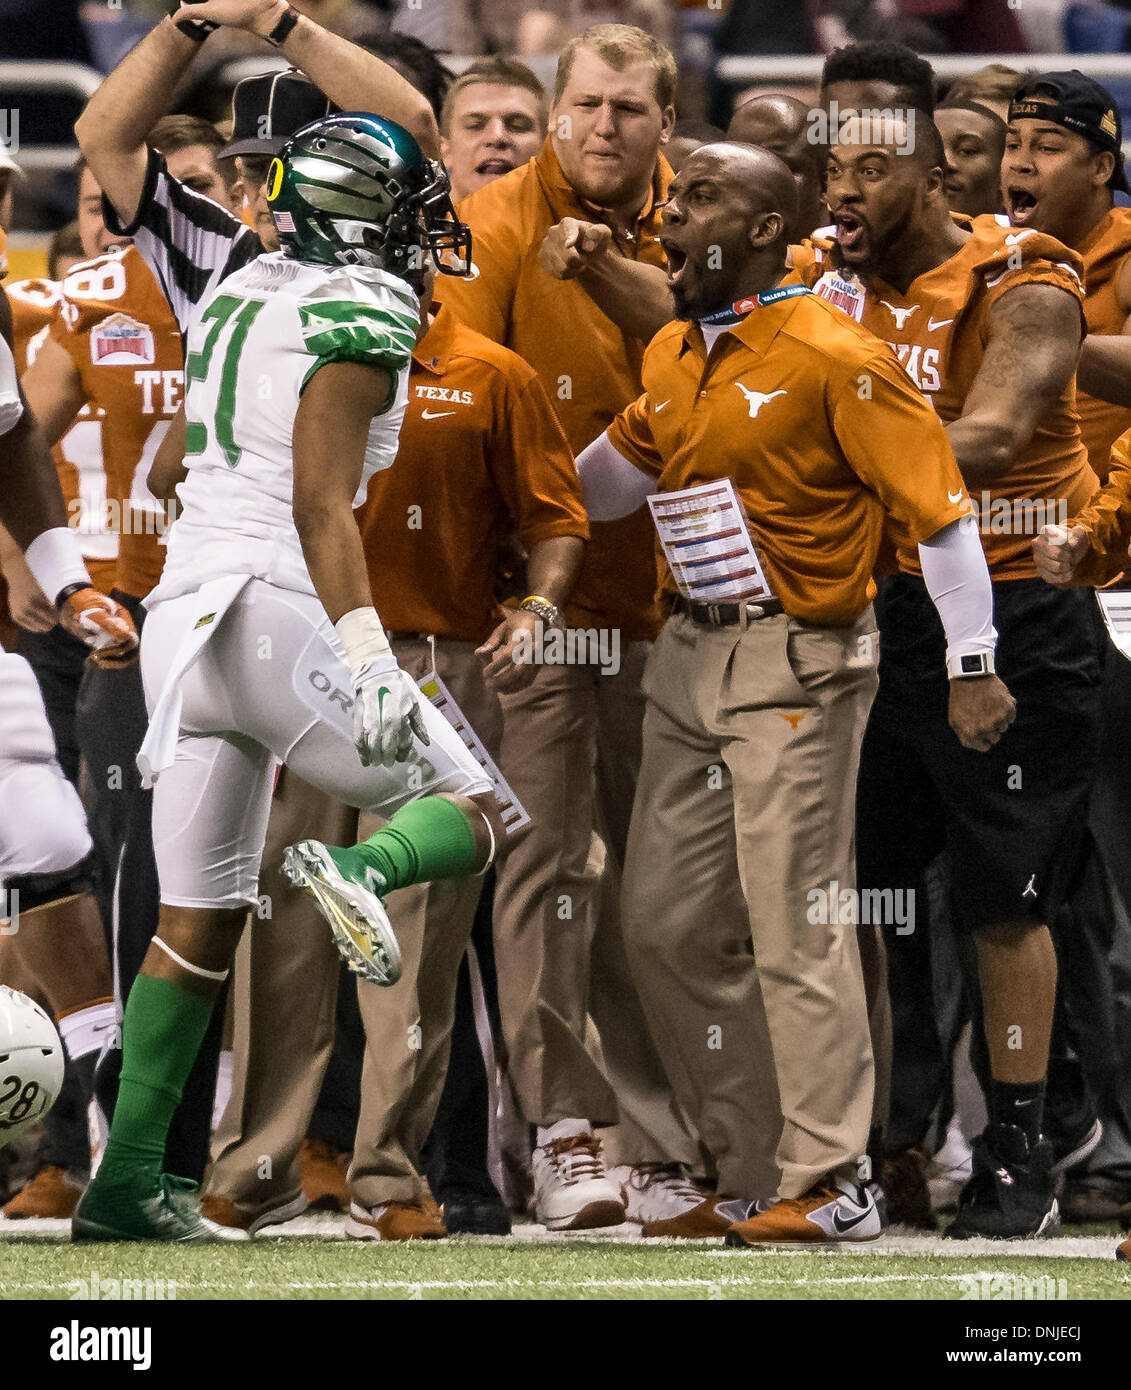 San Antonio, Texas, USA. 30th Dec, 2013. December 30, 2103: Oregon Ducks cornerback Avery Patterson (21) and Texas Longhorns strength and conditioning coach Bennie Wylie exchange words during the Valero Alamo Bowl NCAA football game between the Oregon Ducks and the Texas Longhorns at the Alamodome in San Antonio, TX. The Ducks defeated the Longhorns 30-7. Credit:  csm/Alamy Live News Stock Photo